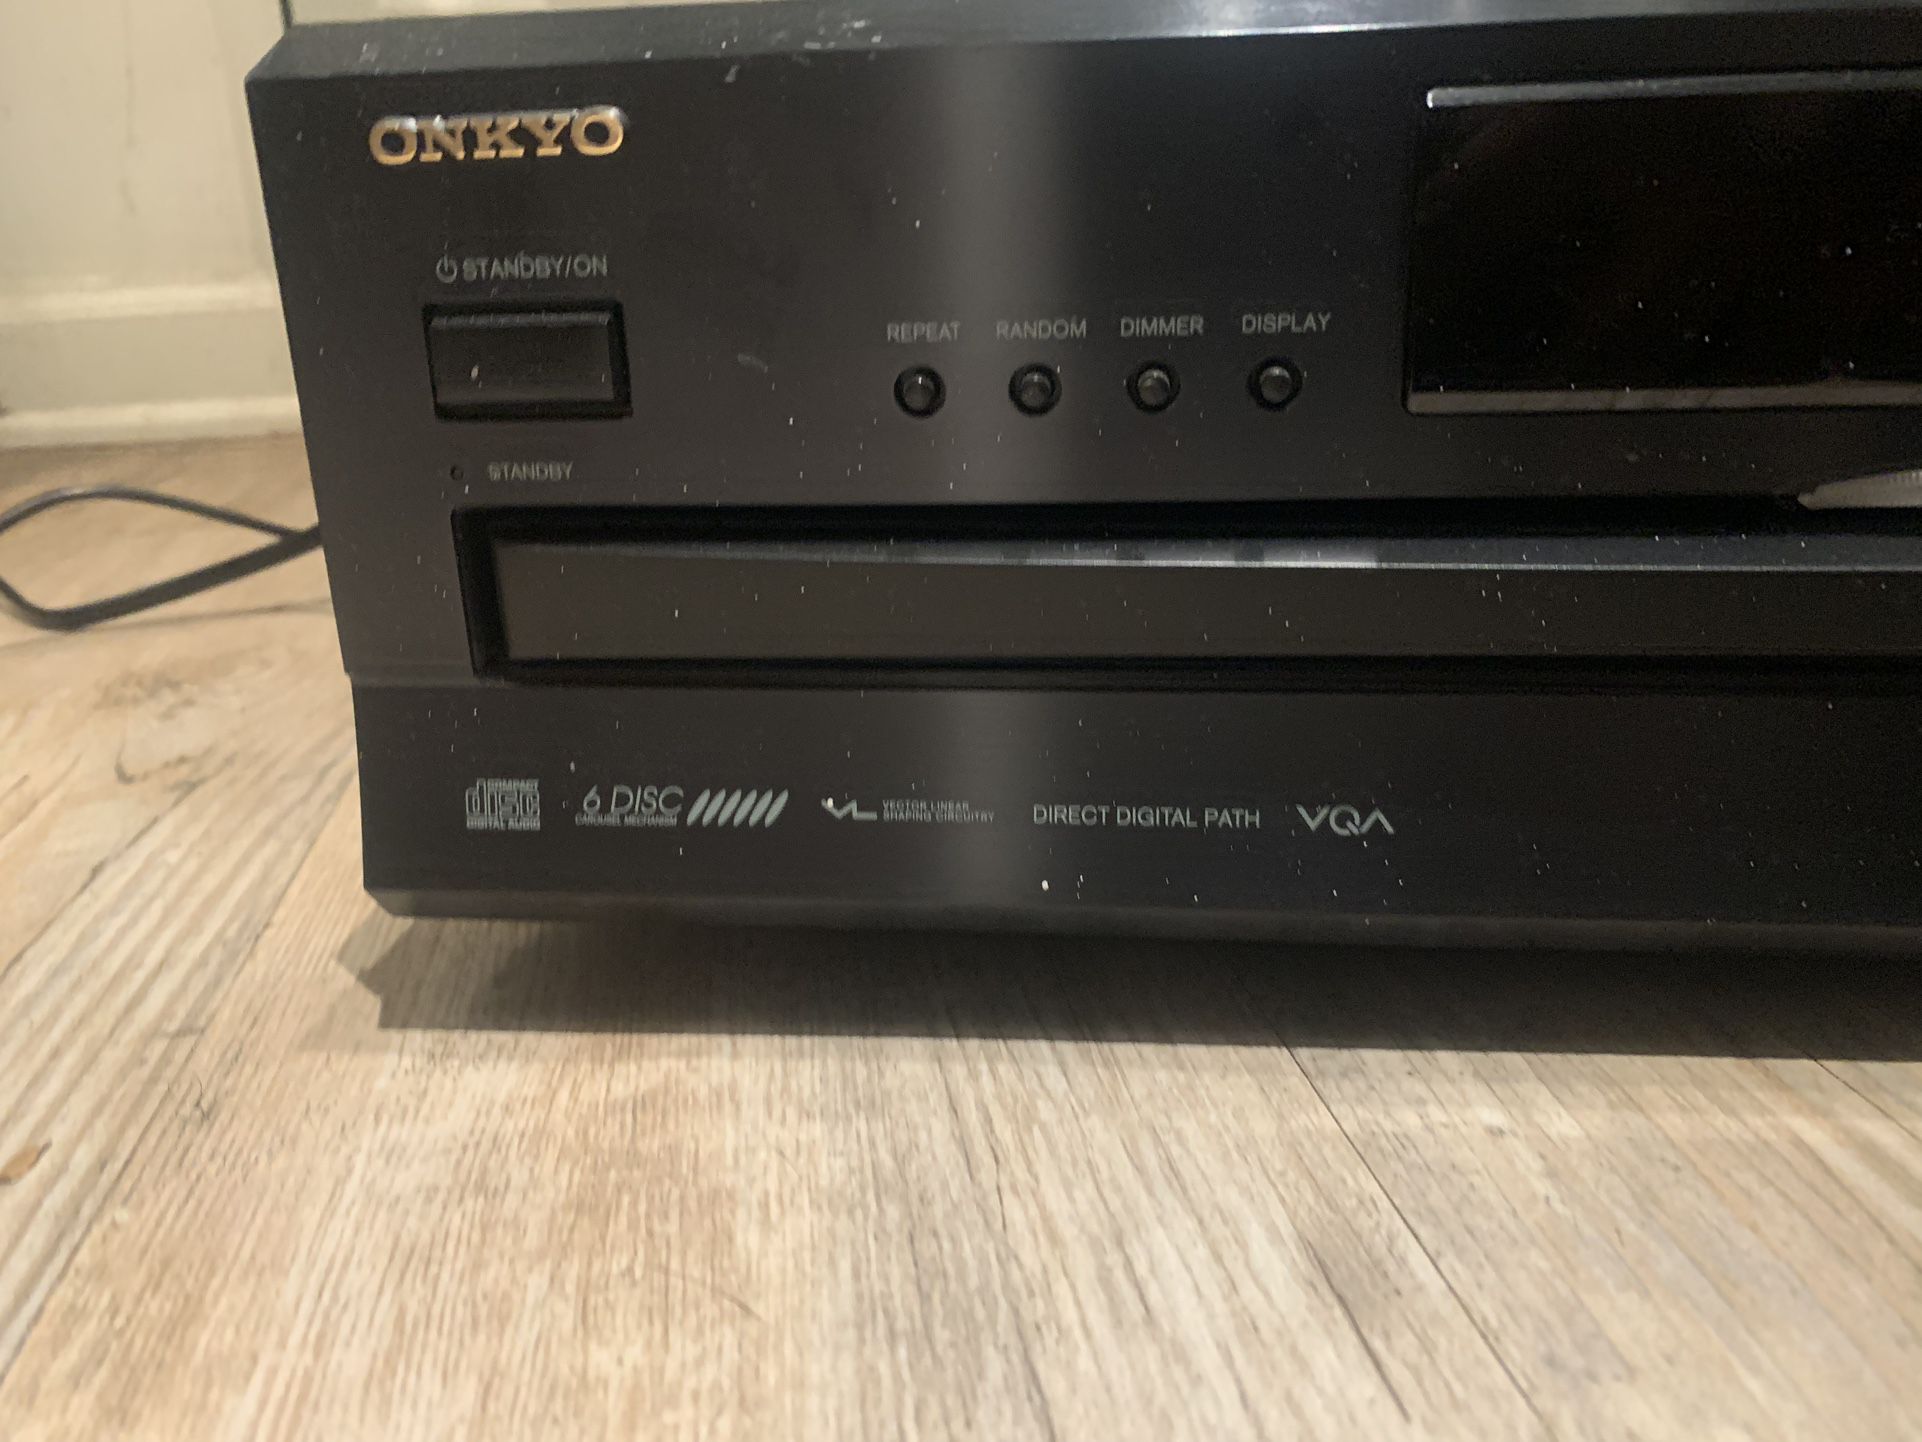 Onkyo DX-C390 6-Disc CD Player Compact Disc Carousel Changer - No Remote